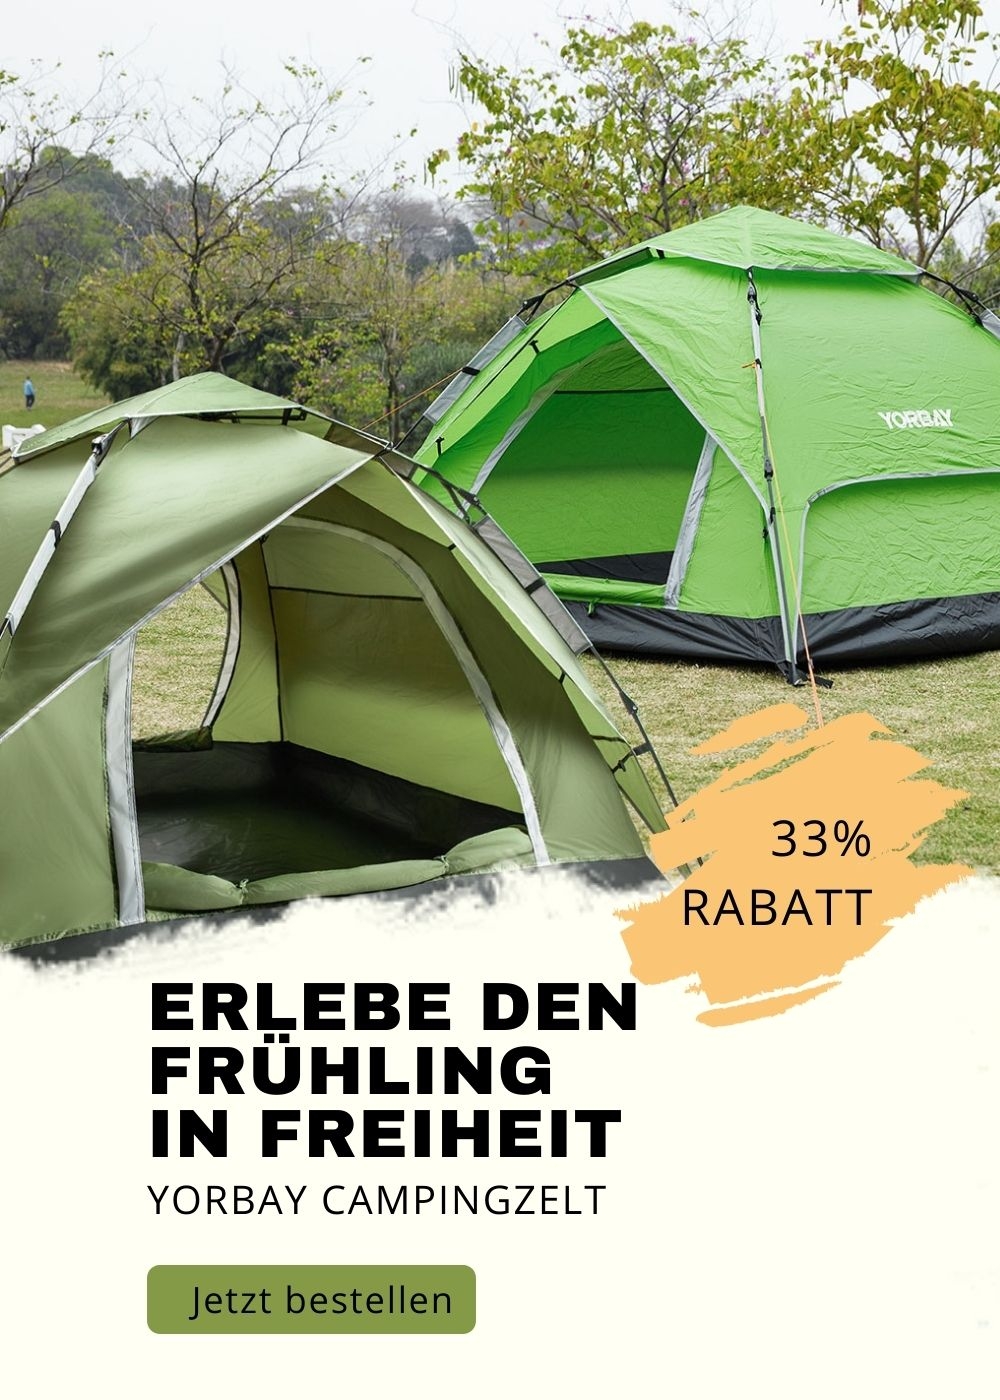 Outdoor Campingzelt